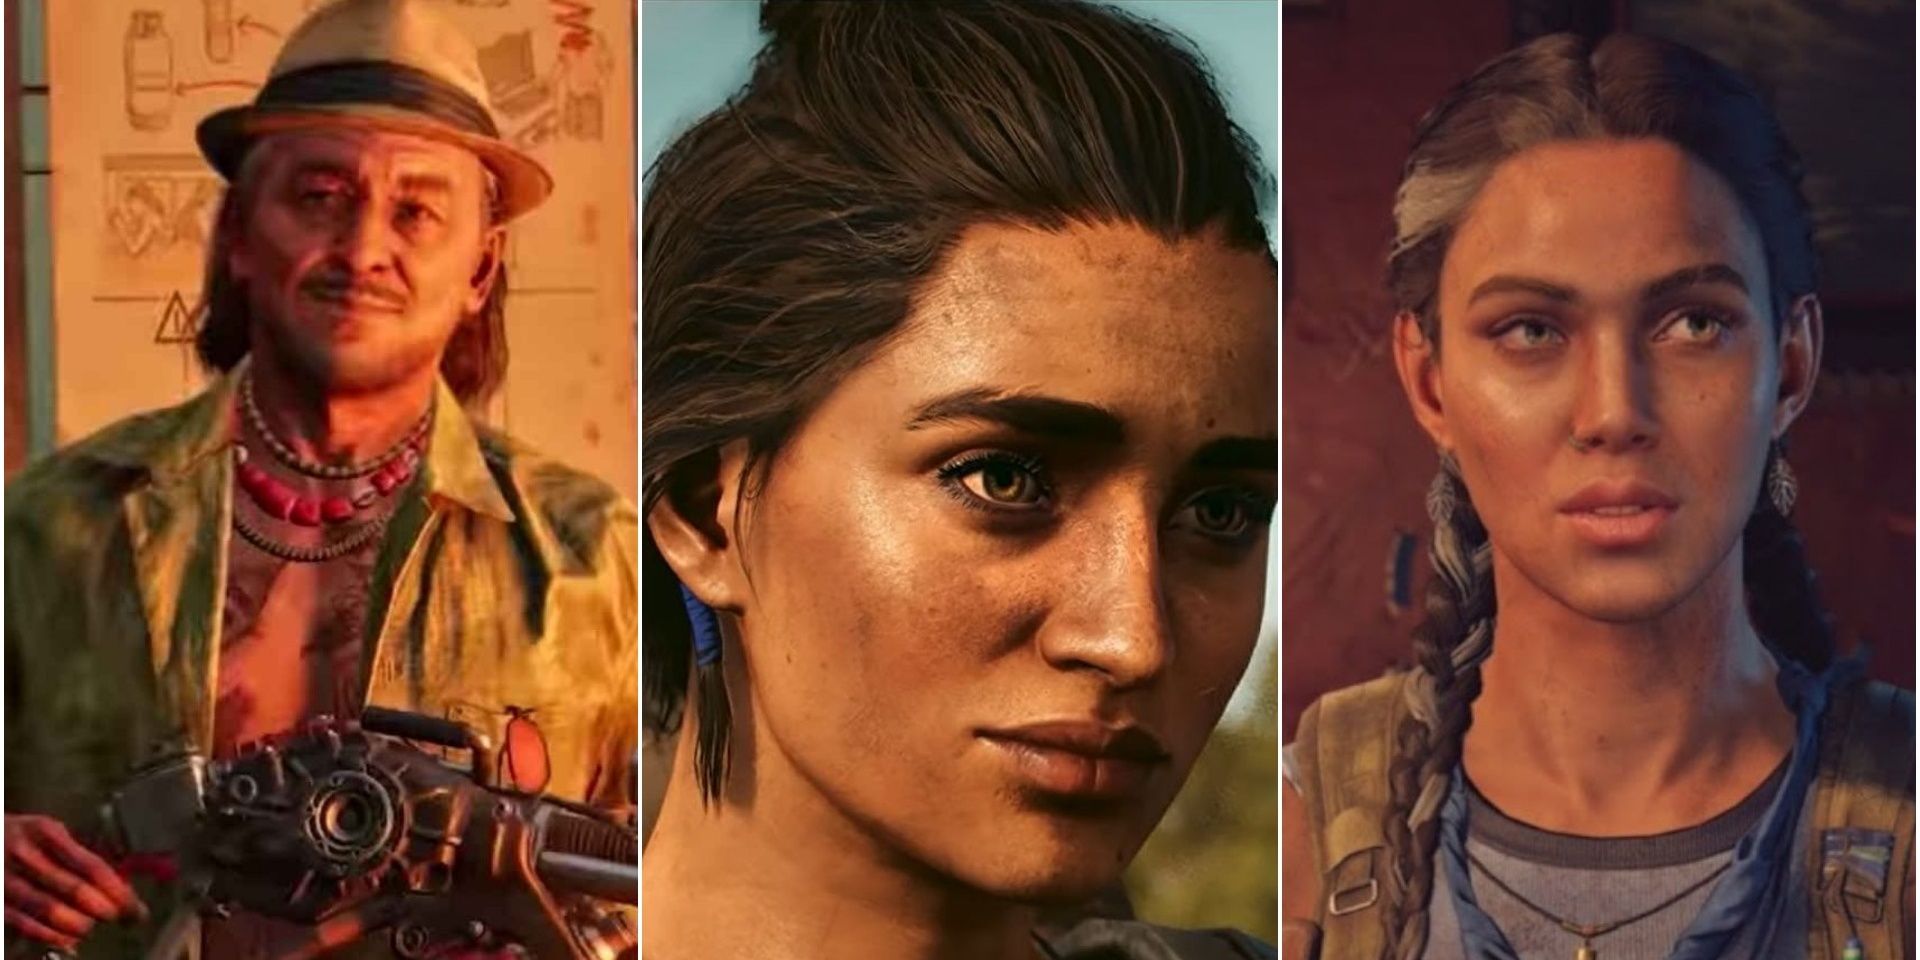 Far Cry on X: Over 30 million players have joined the fight